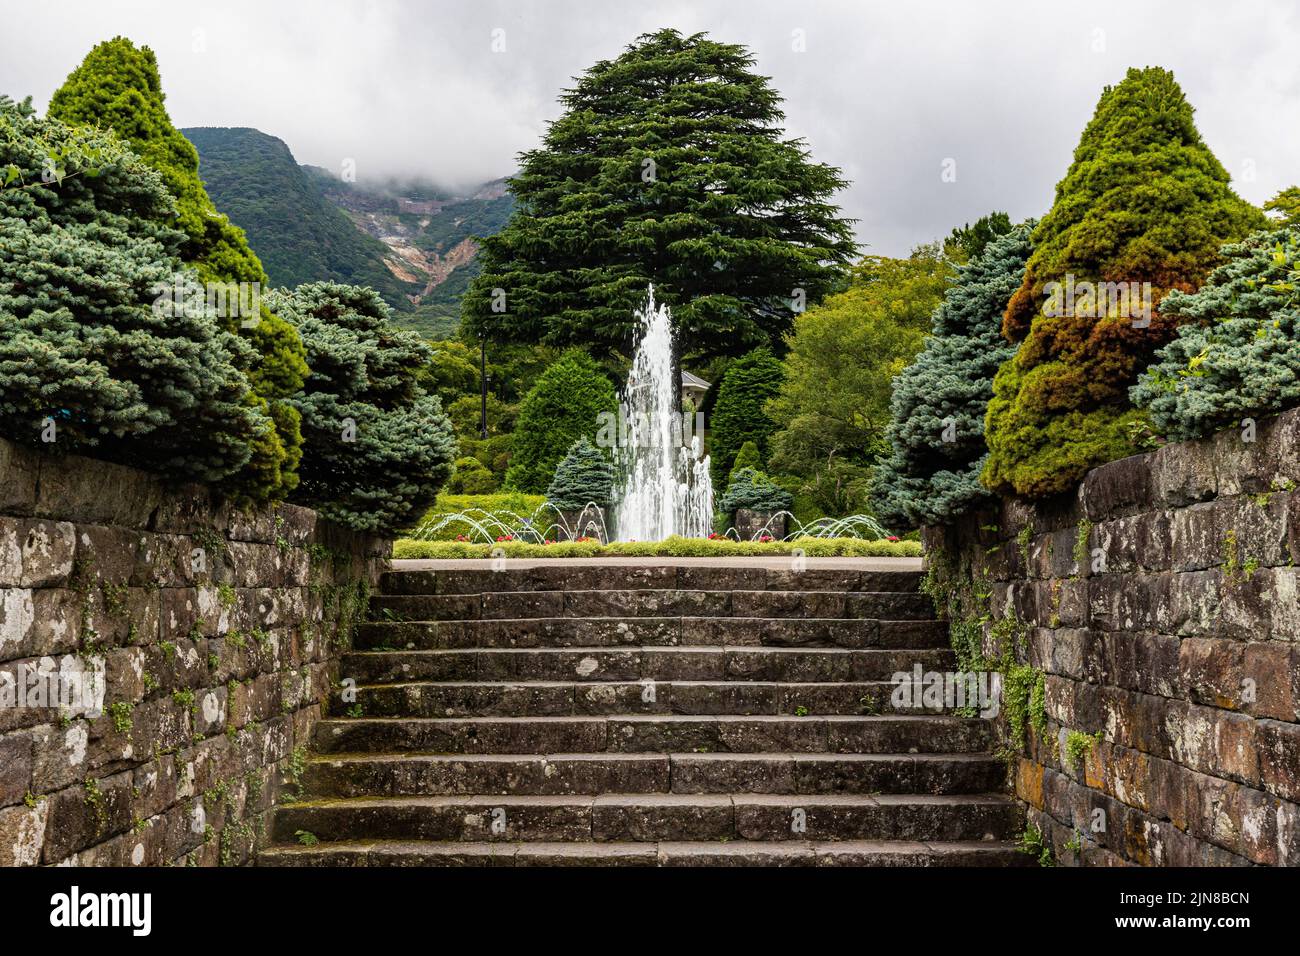 Gora Park Fountain - Gora Park is a Western-style landscape park located on the steep slope above Gora Station in Hakone National Park. It is a relaxi Stock Photo